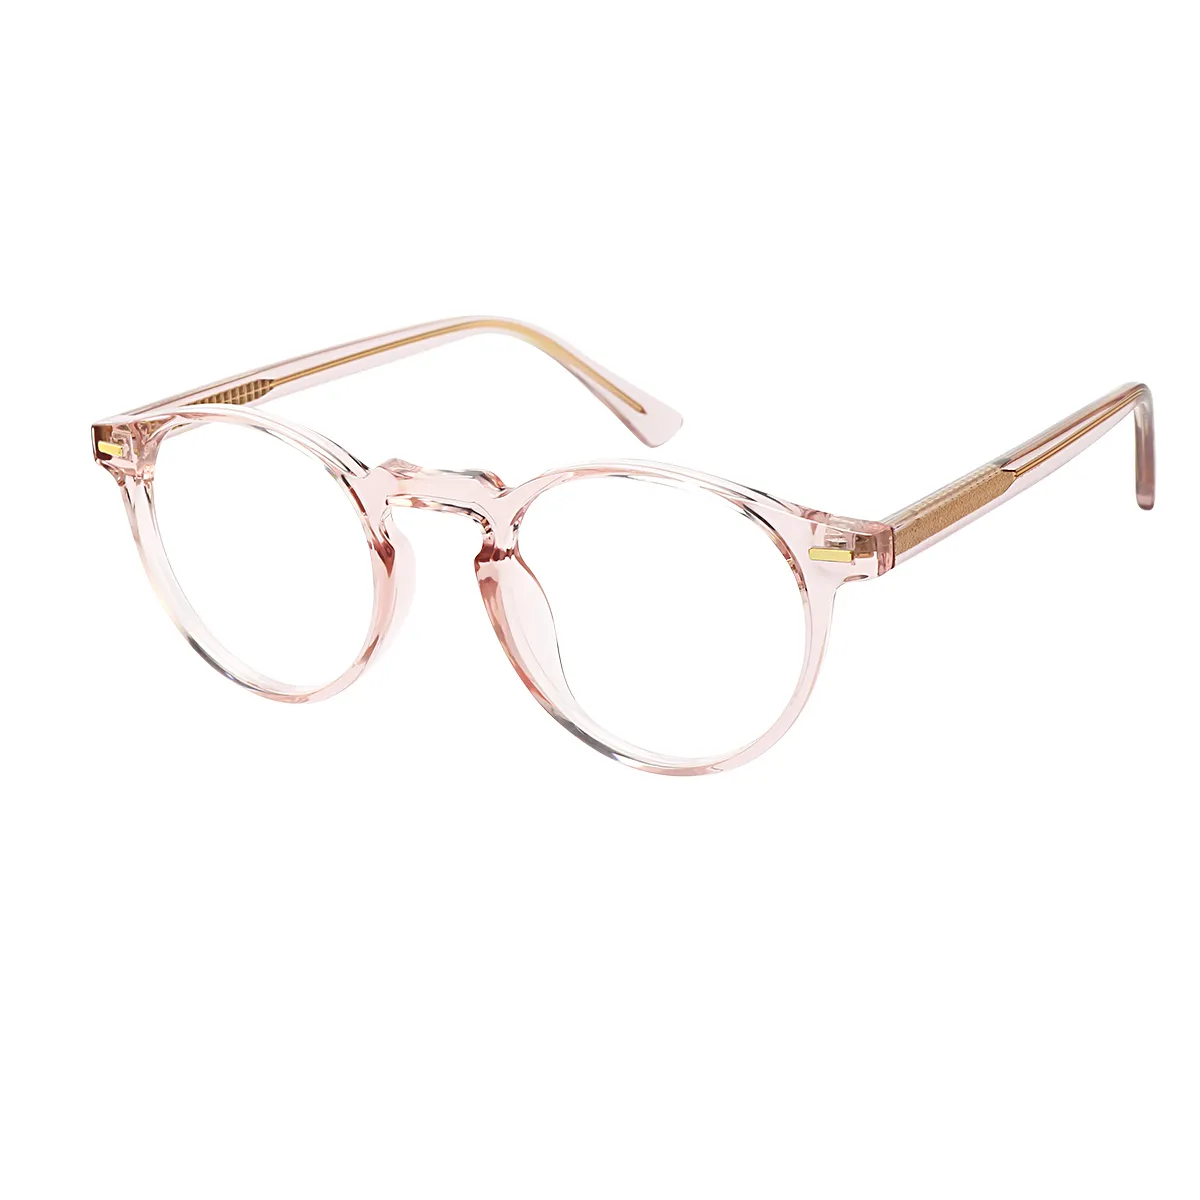 Fashion Round Pink/Transparent Reading Glasses for Women